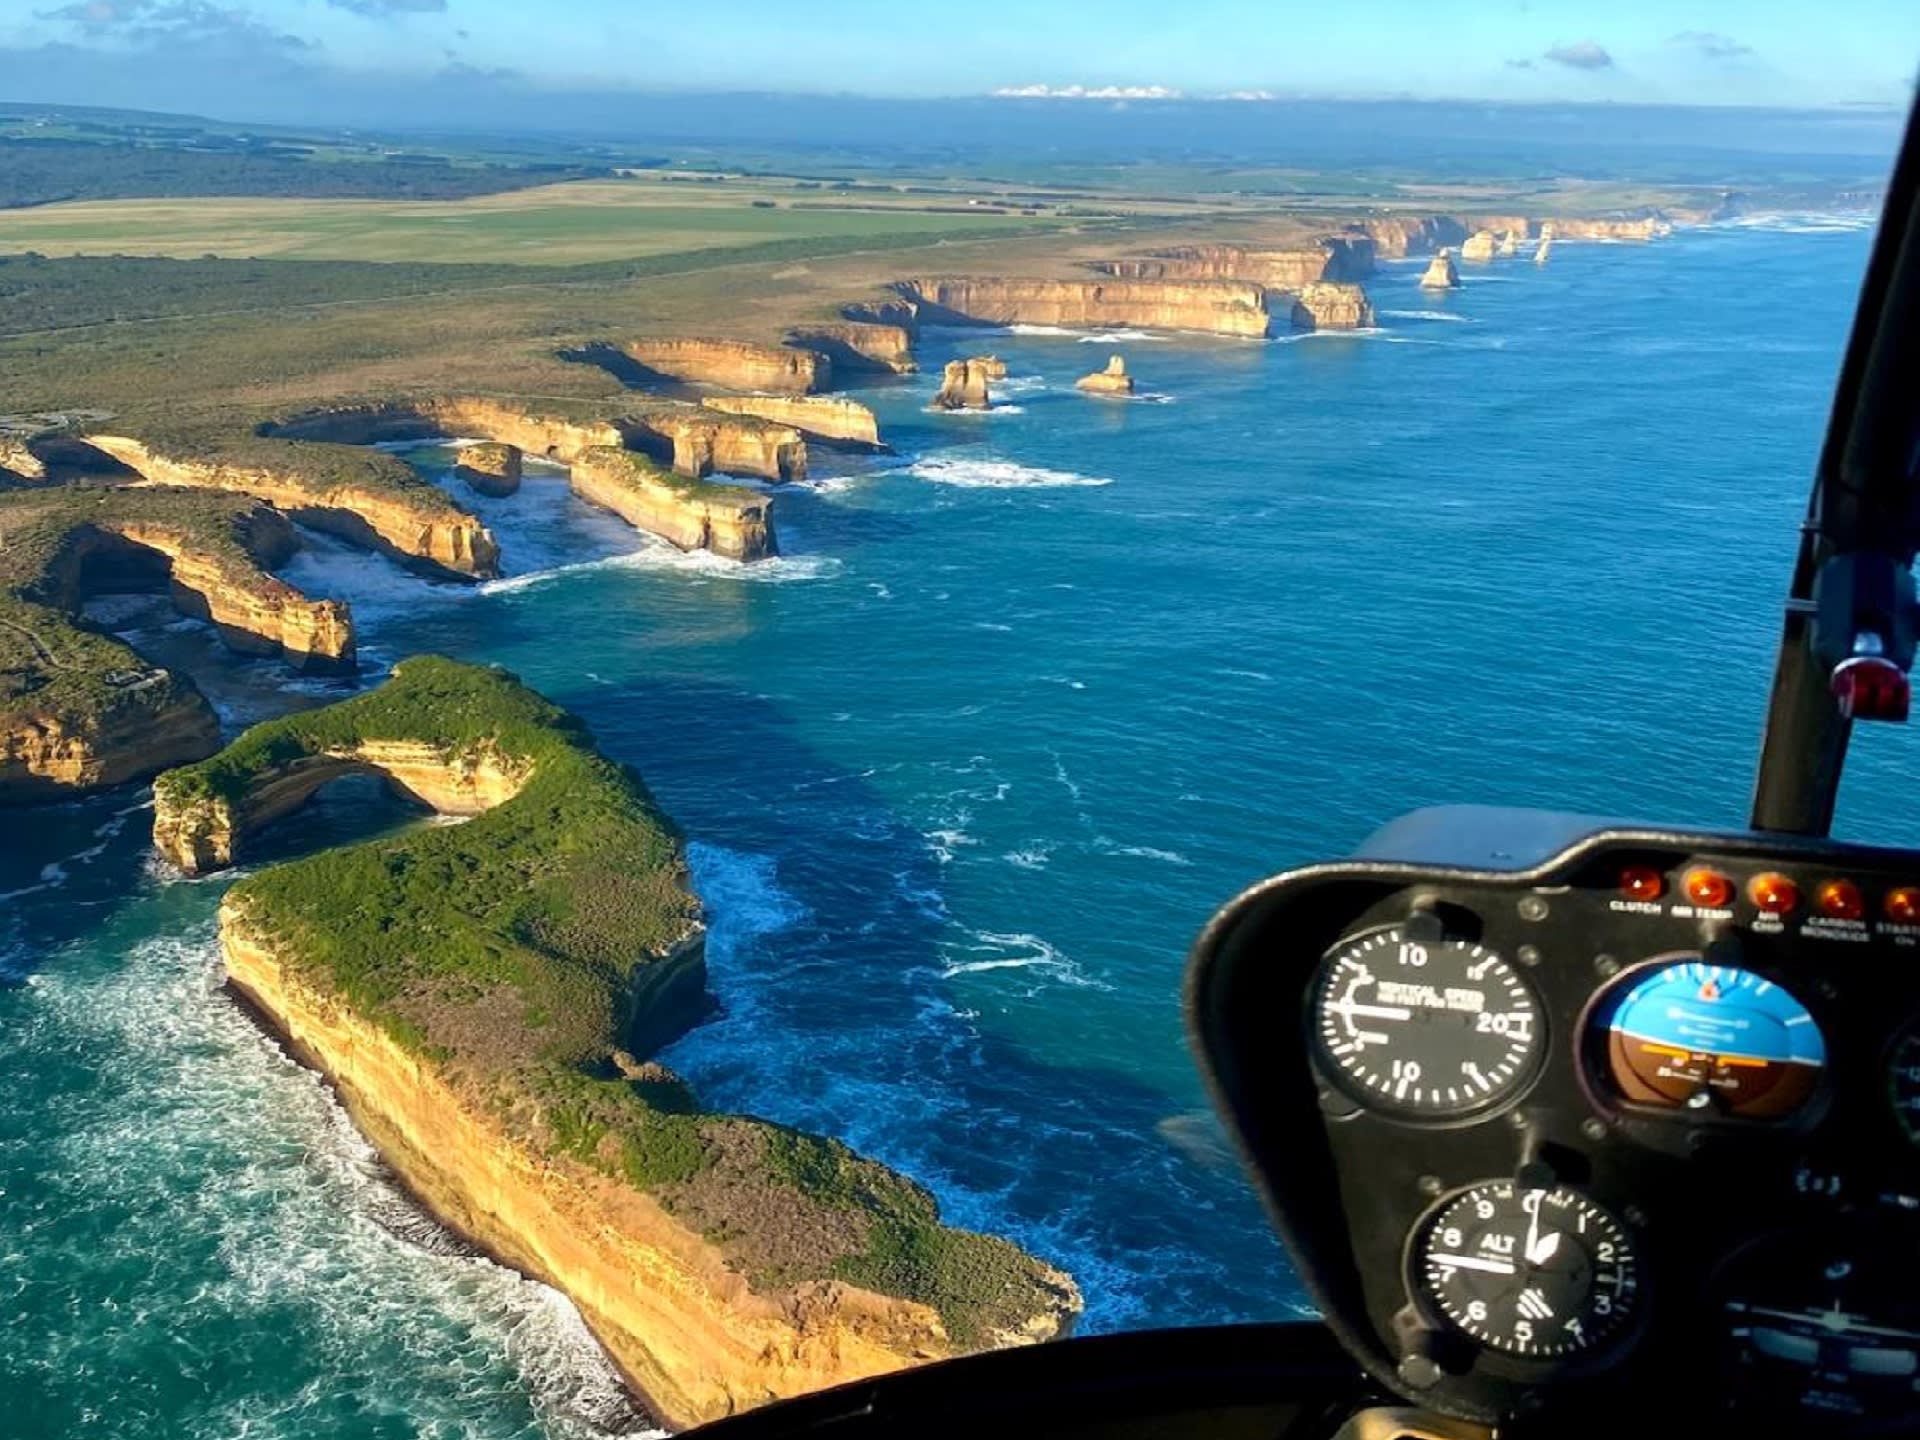 Private VIP Helicopter Experience from Melbourne to 12 Apostles